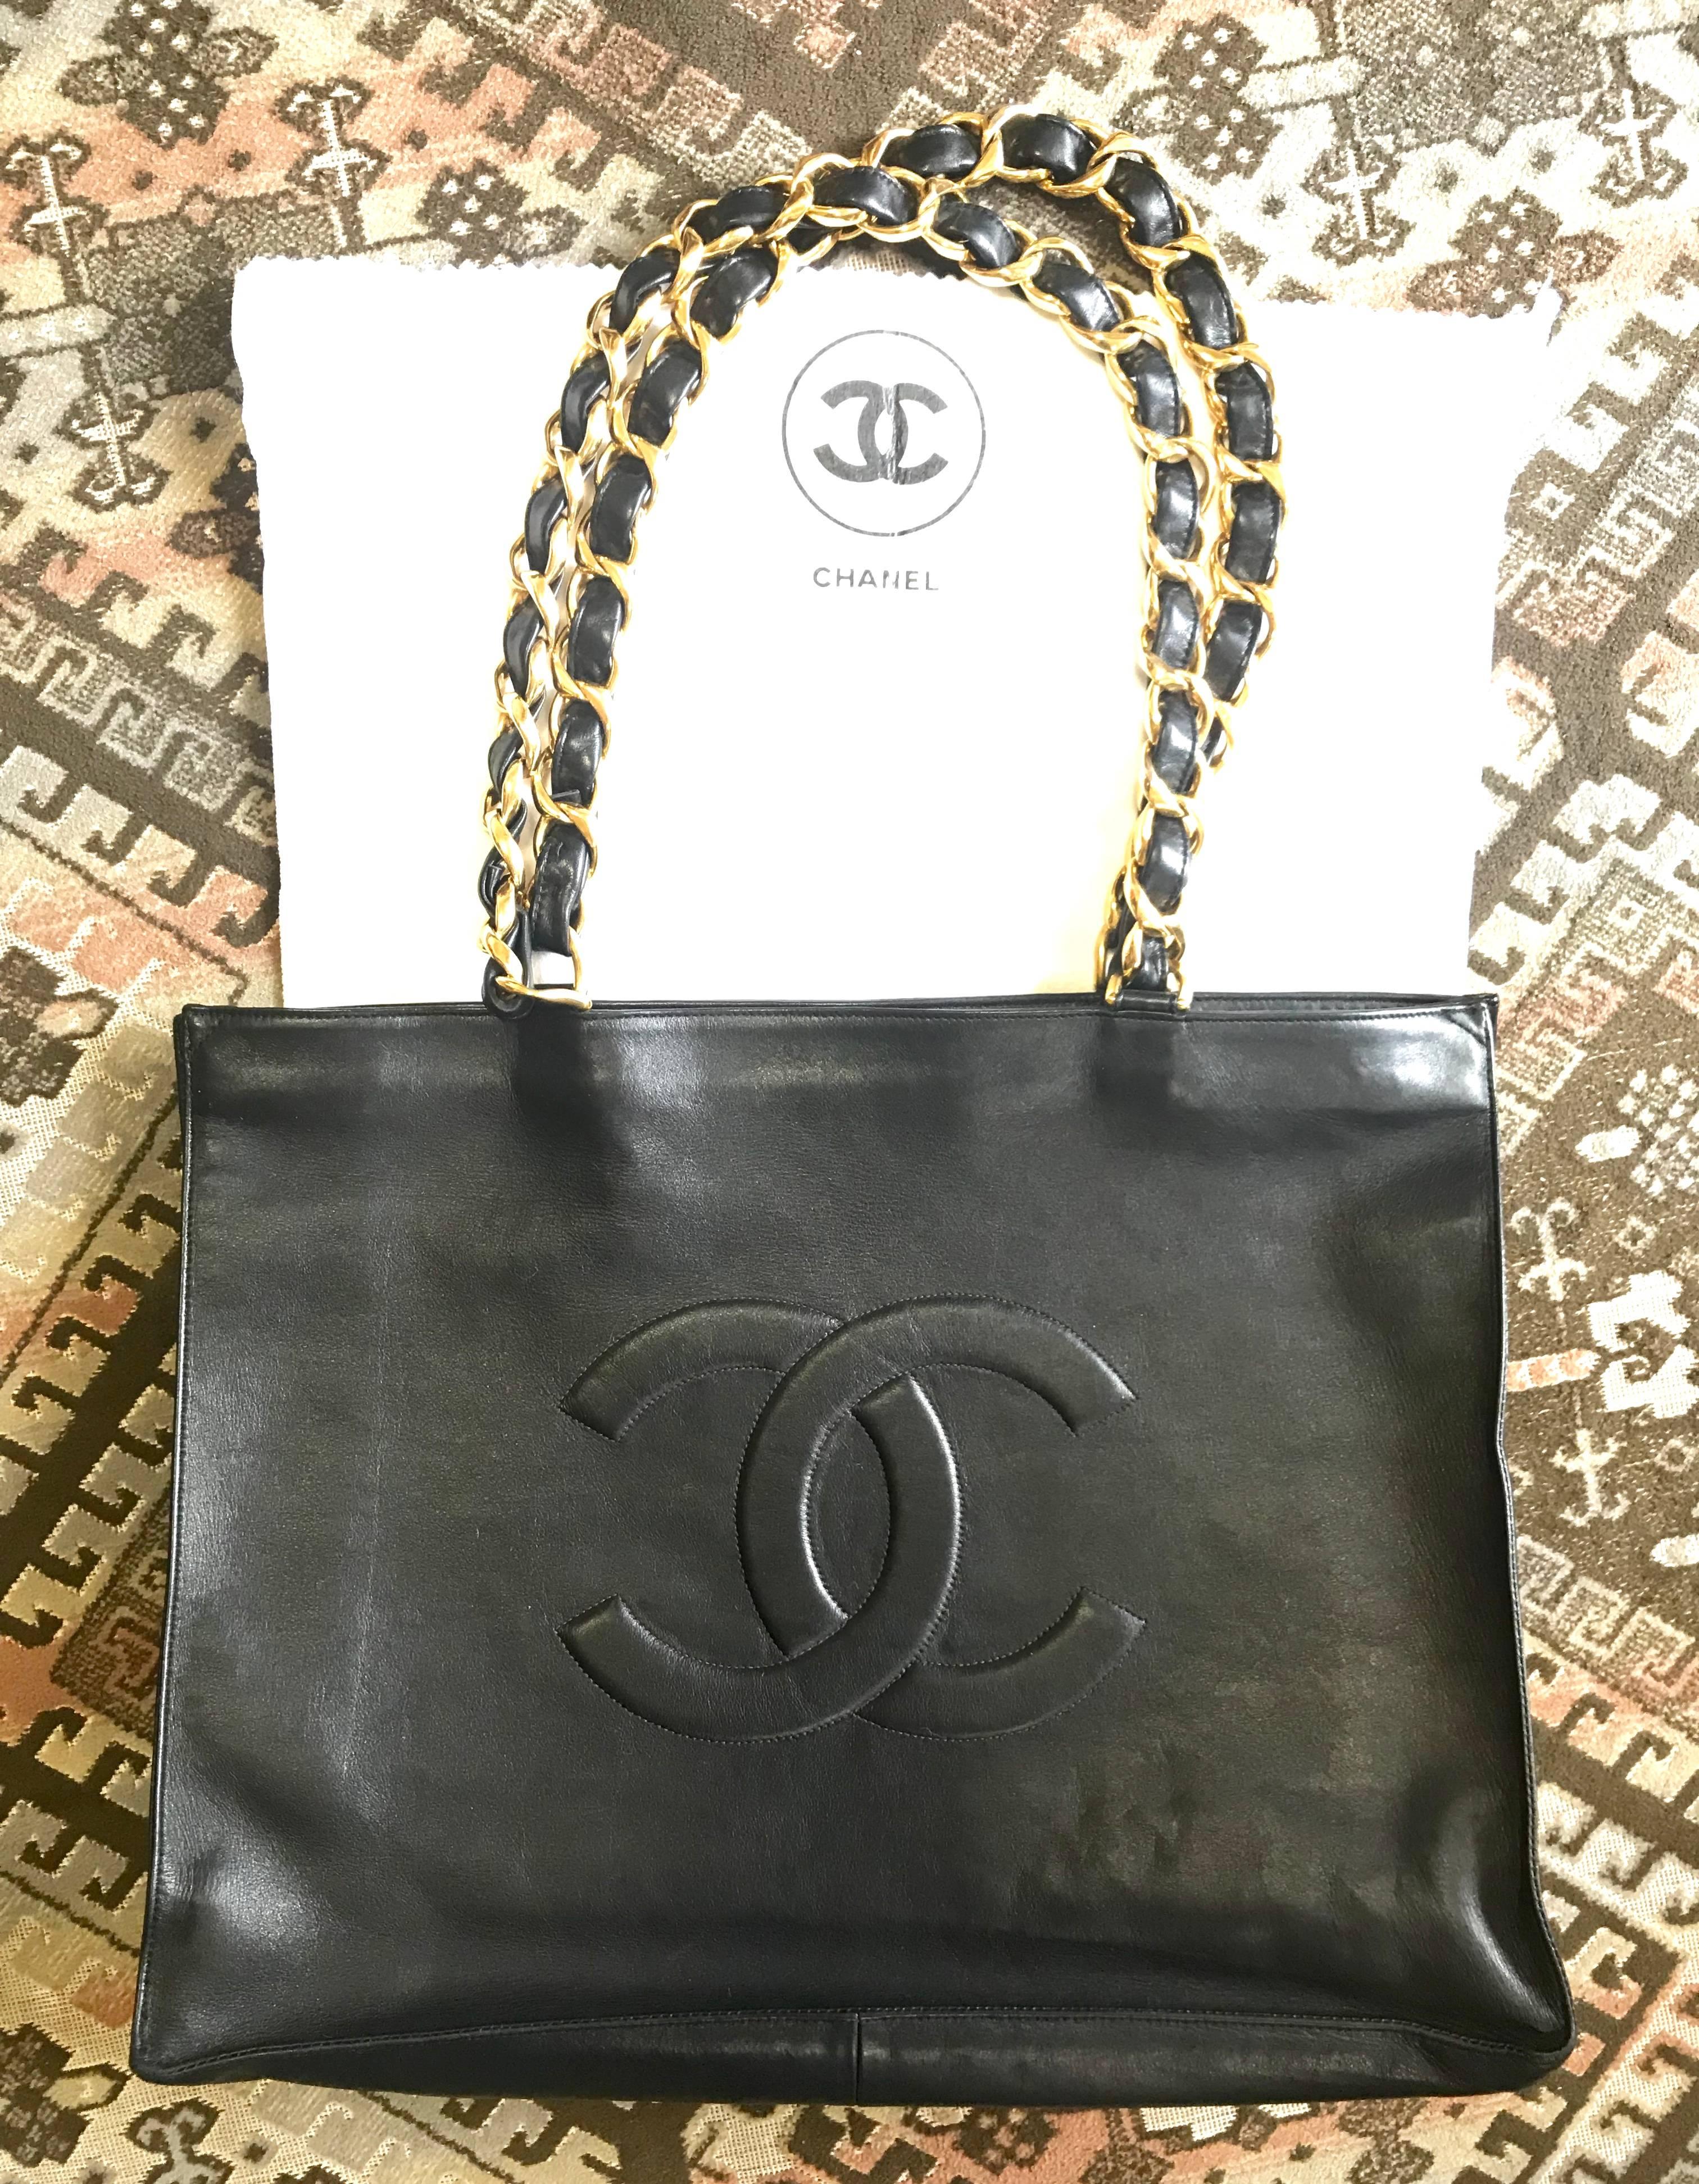 Chanel Vintage black calfskin large tote bag with gold tone chain handles and CC 13